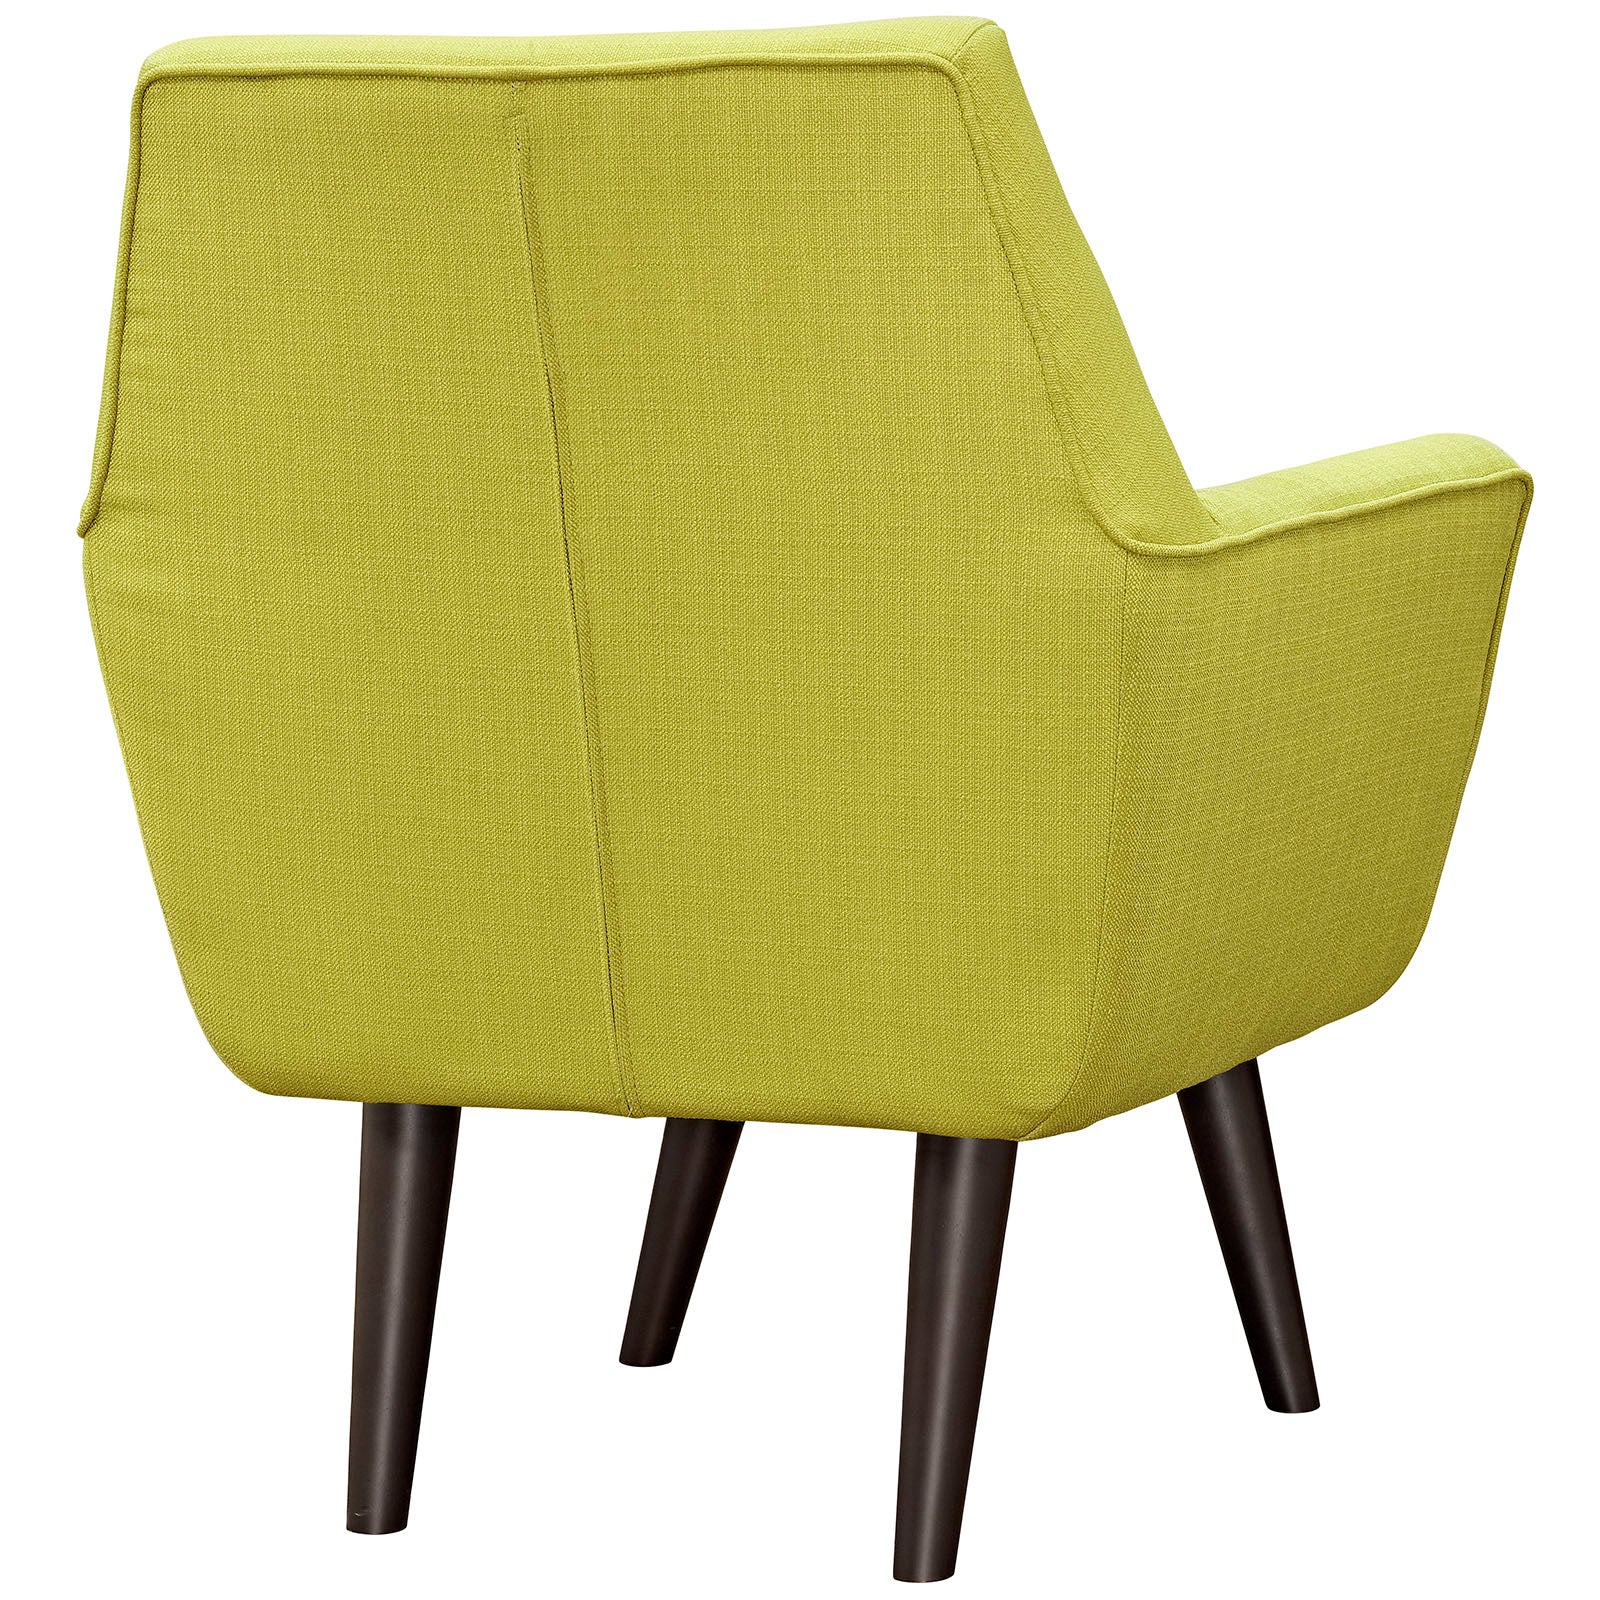 Modway Accent Chairs - Posit Upholstered Fabric Armchair Wheatgrass